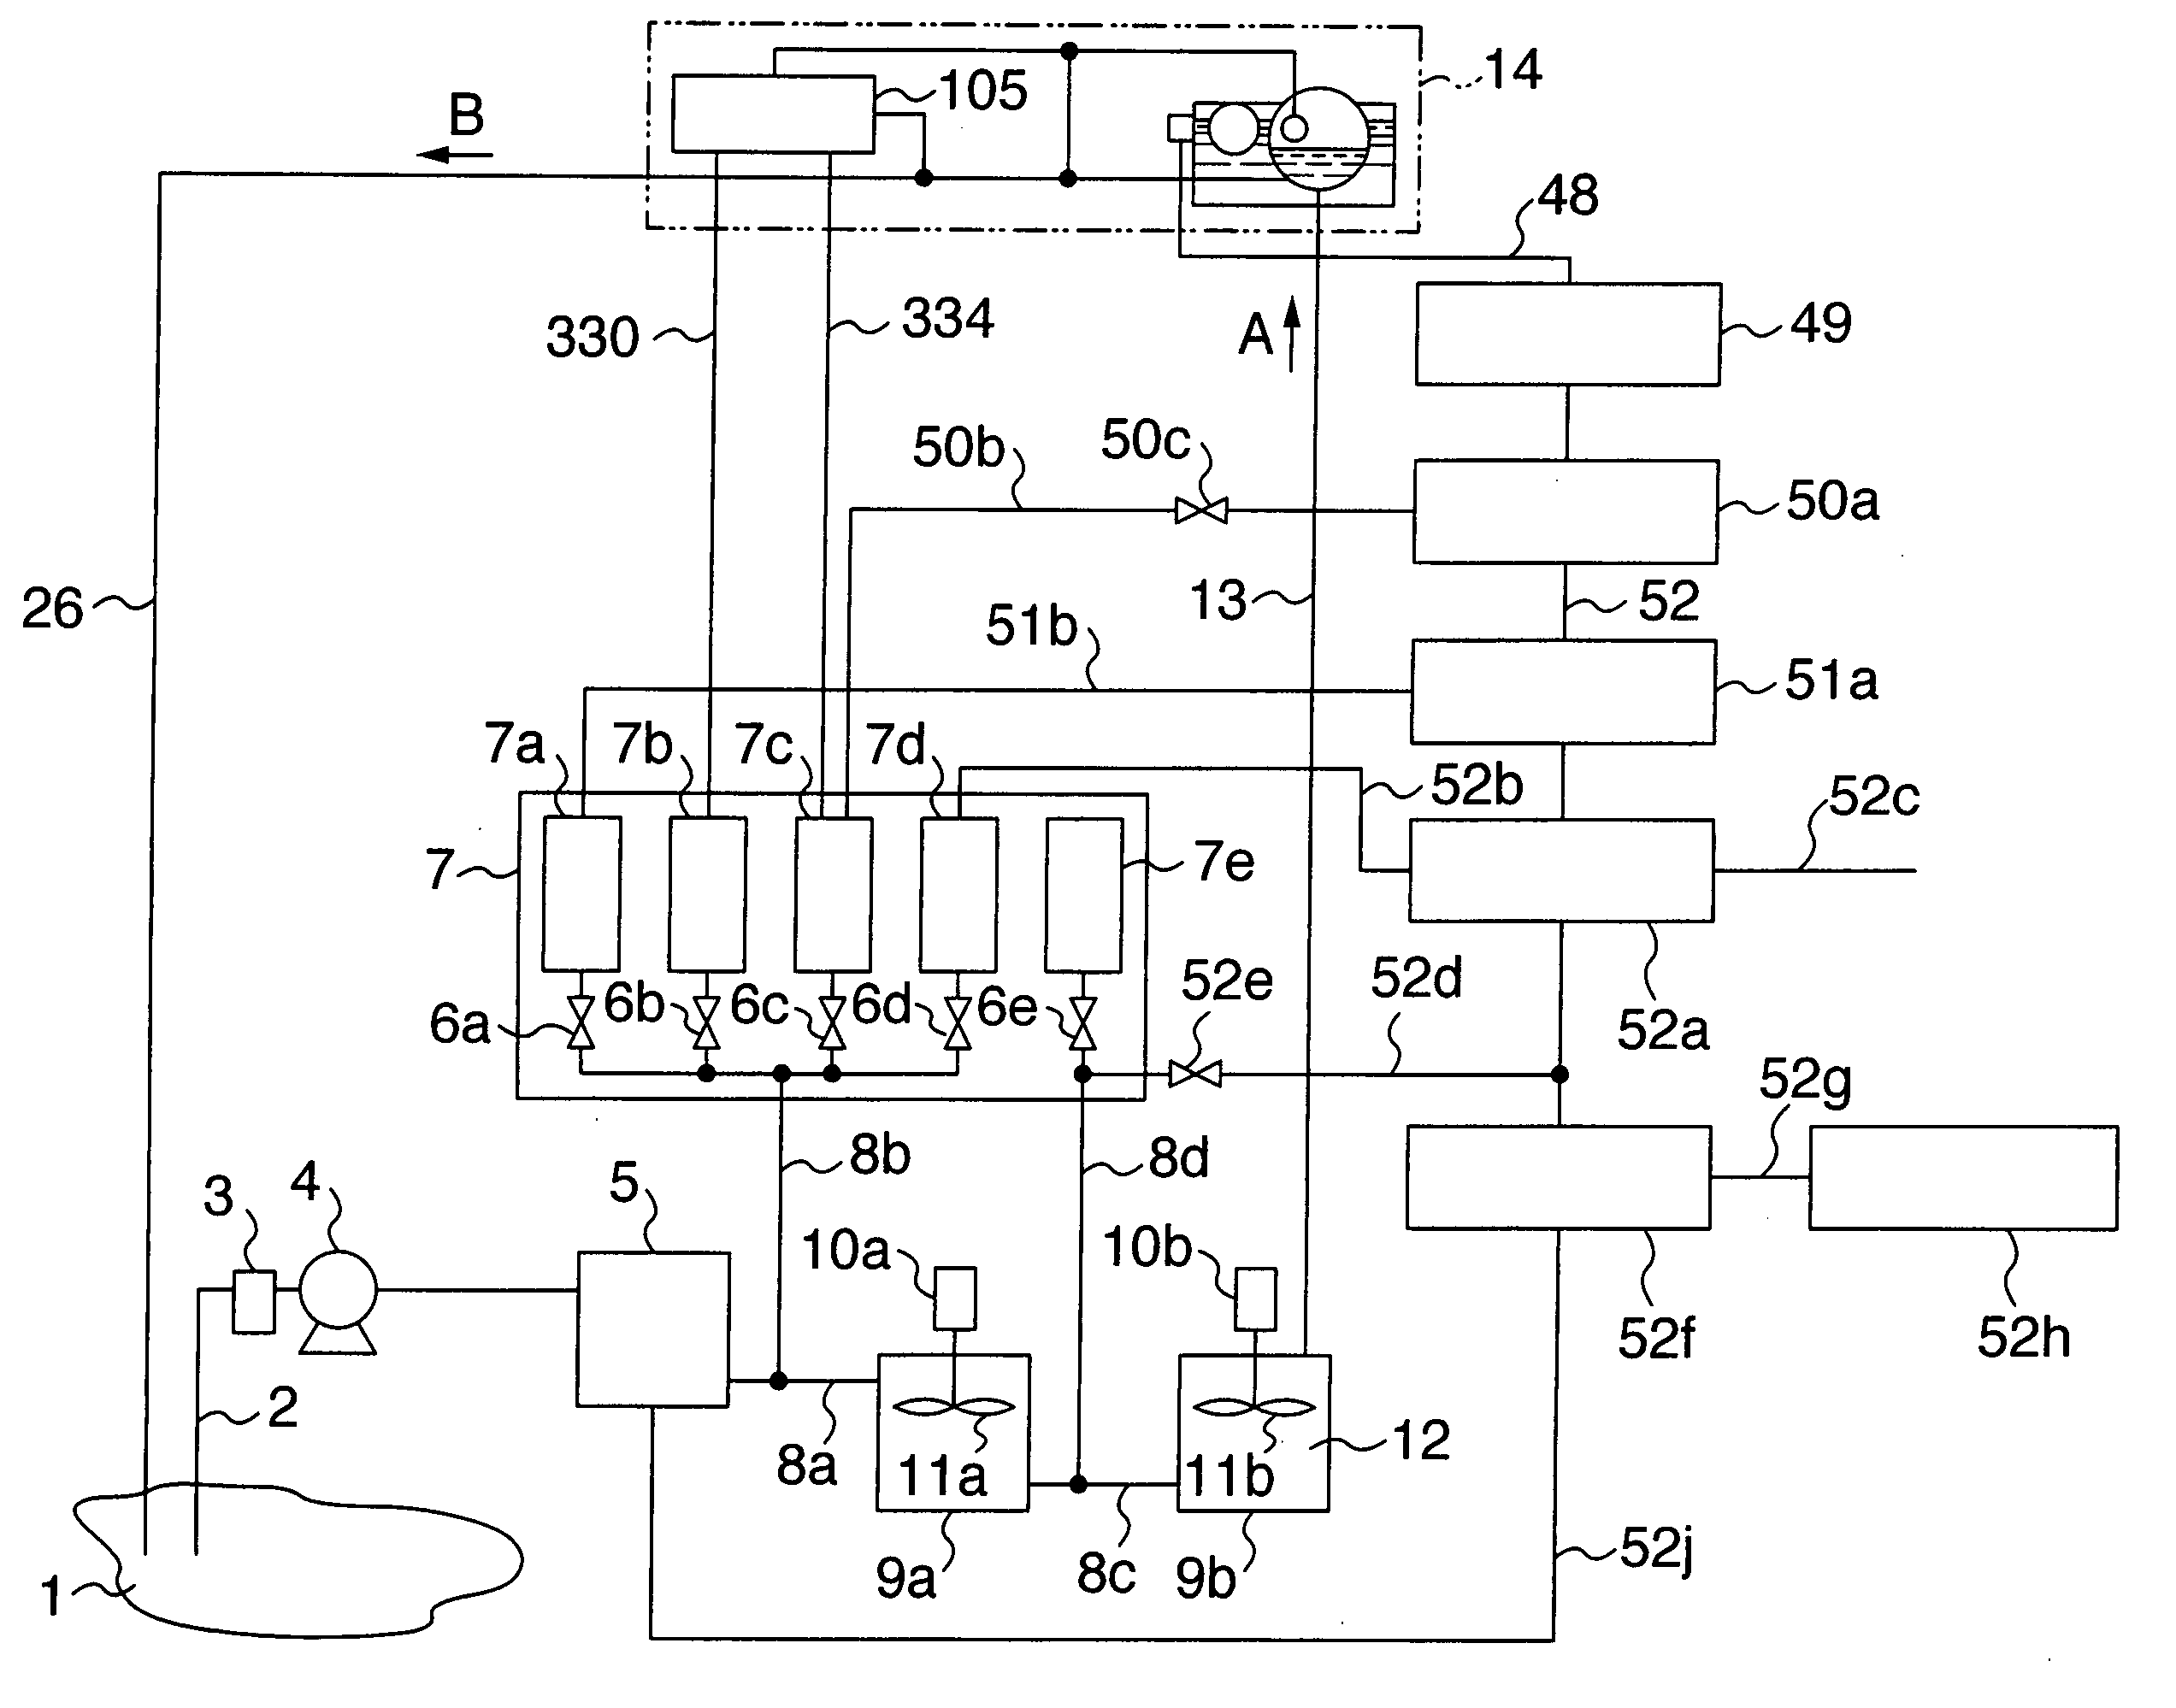 Waste water purification apparatus and waste water purification method including the regeneration of used coagulant